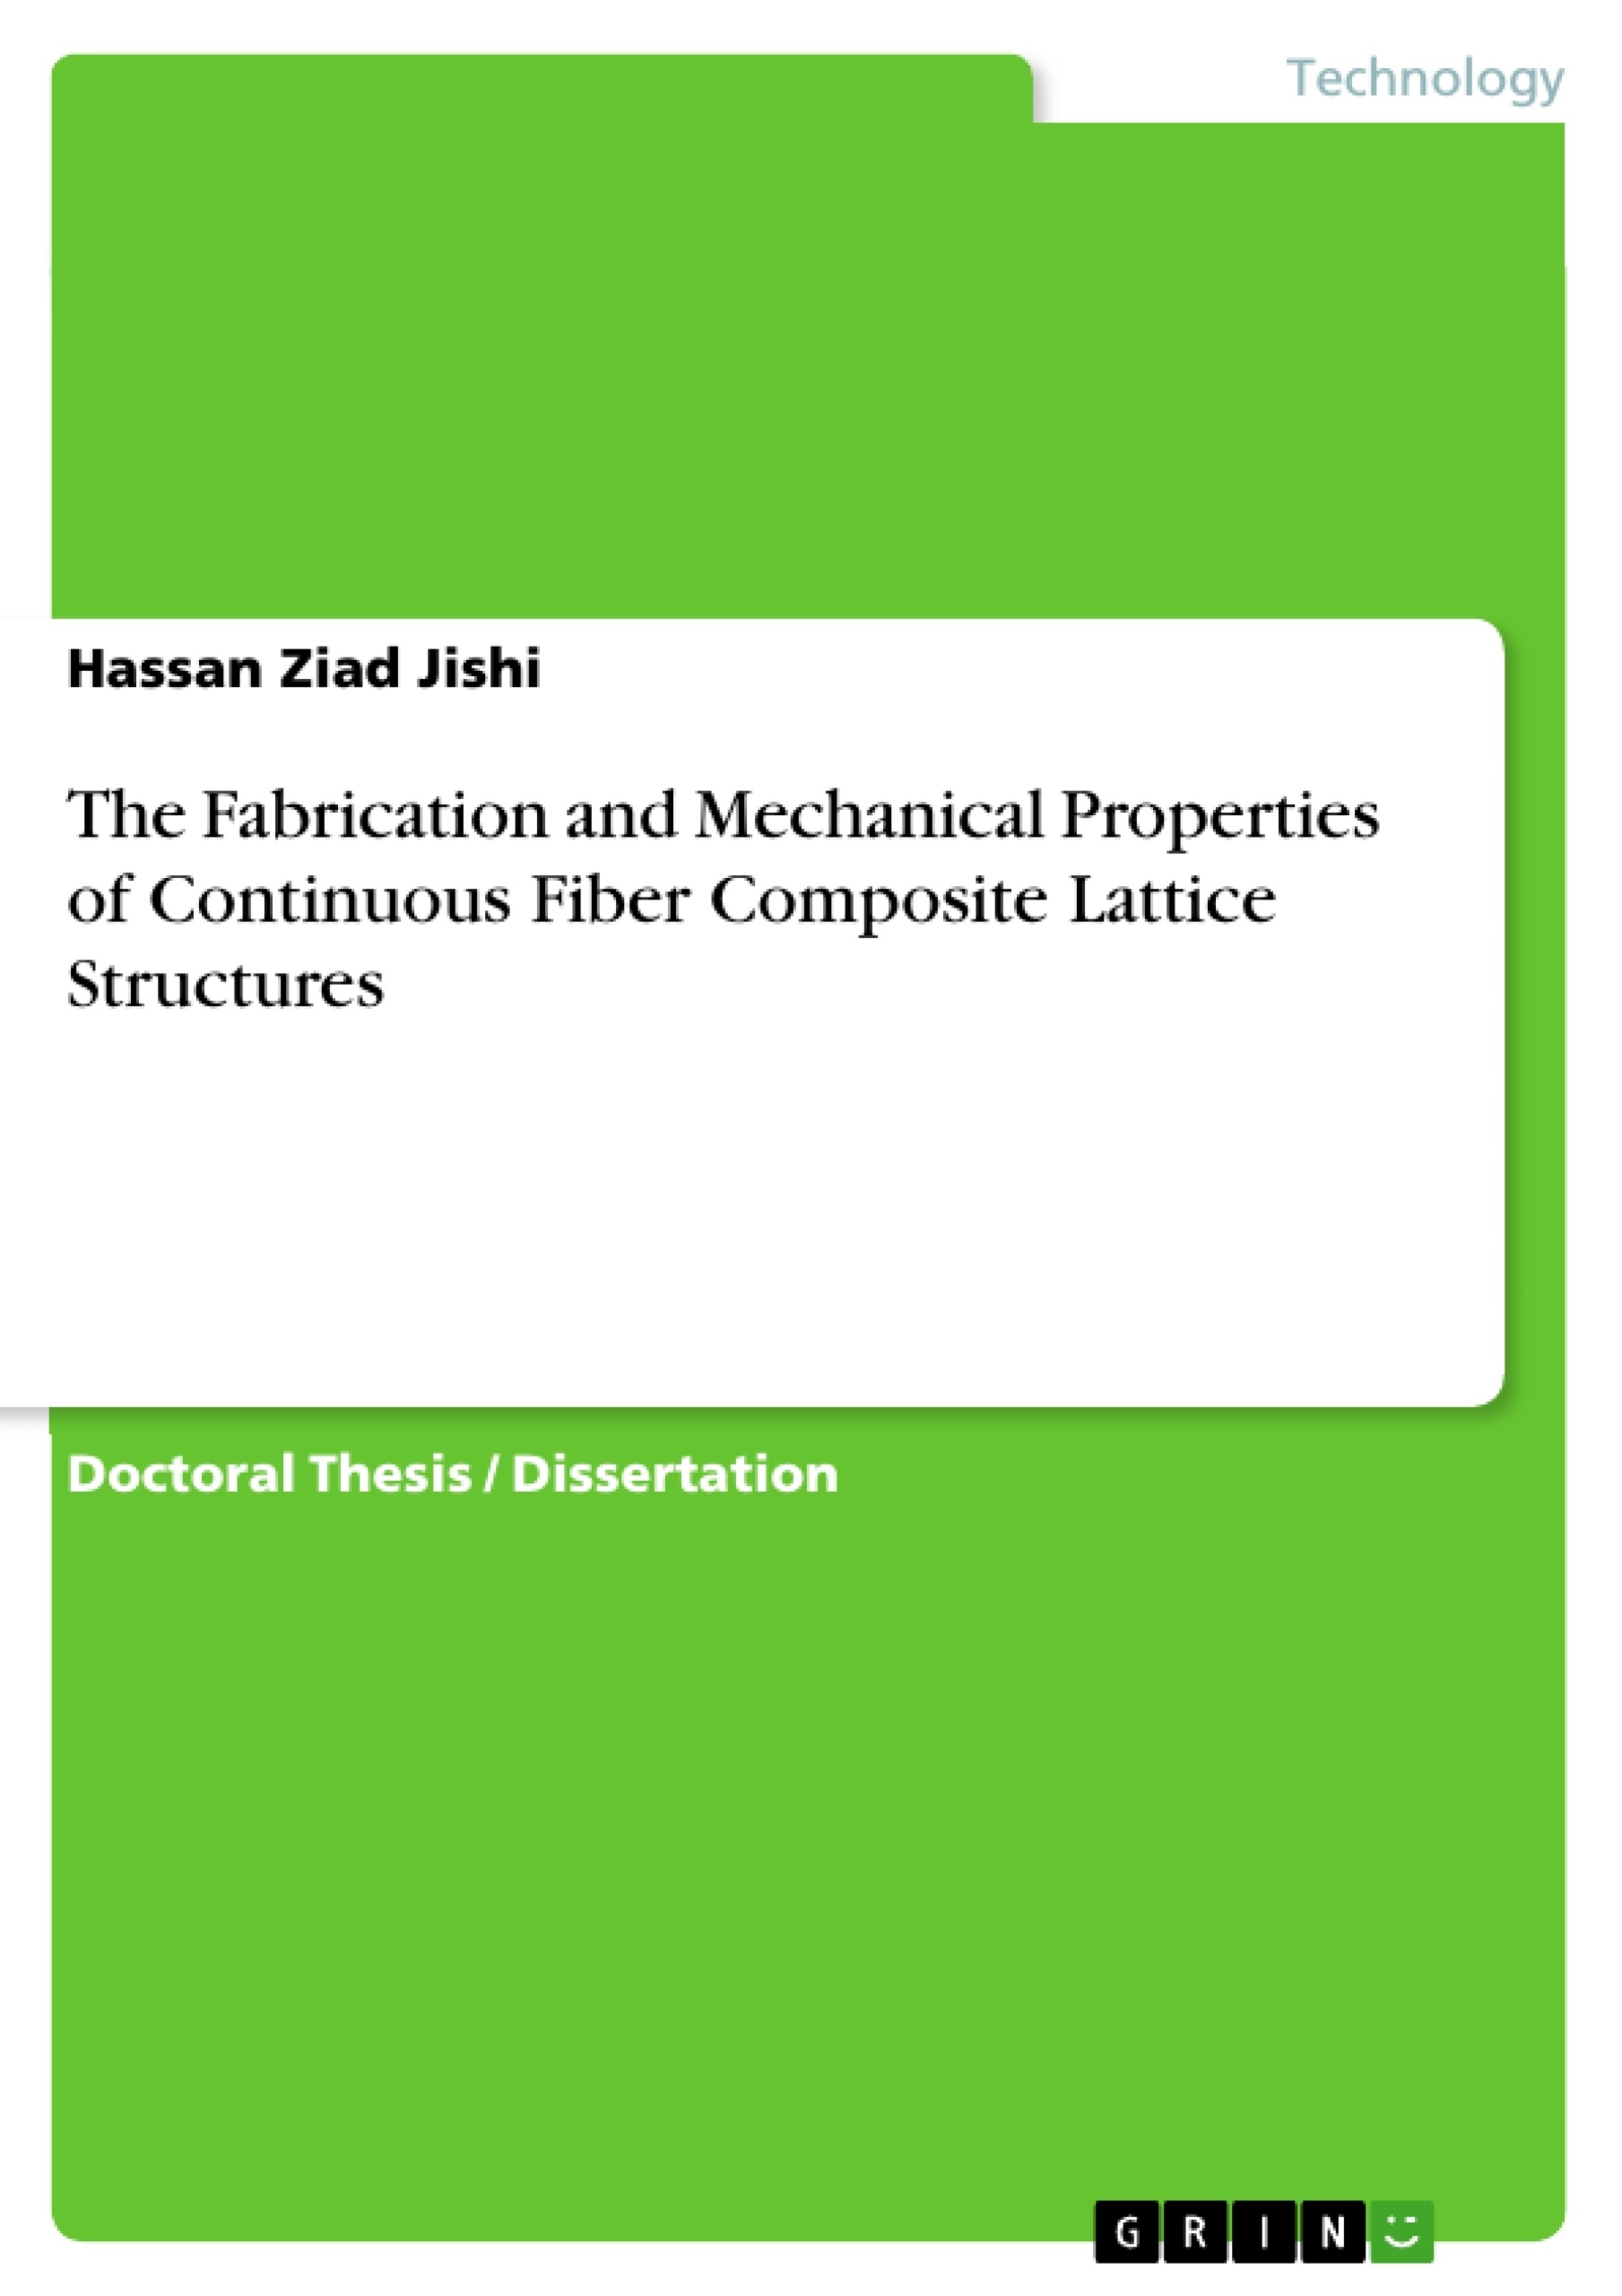 Titre: The Fabrication and Mechanical Properties of Continuous Fiber Composite Lattice Structures